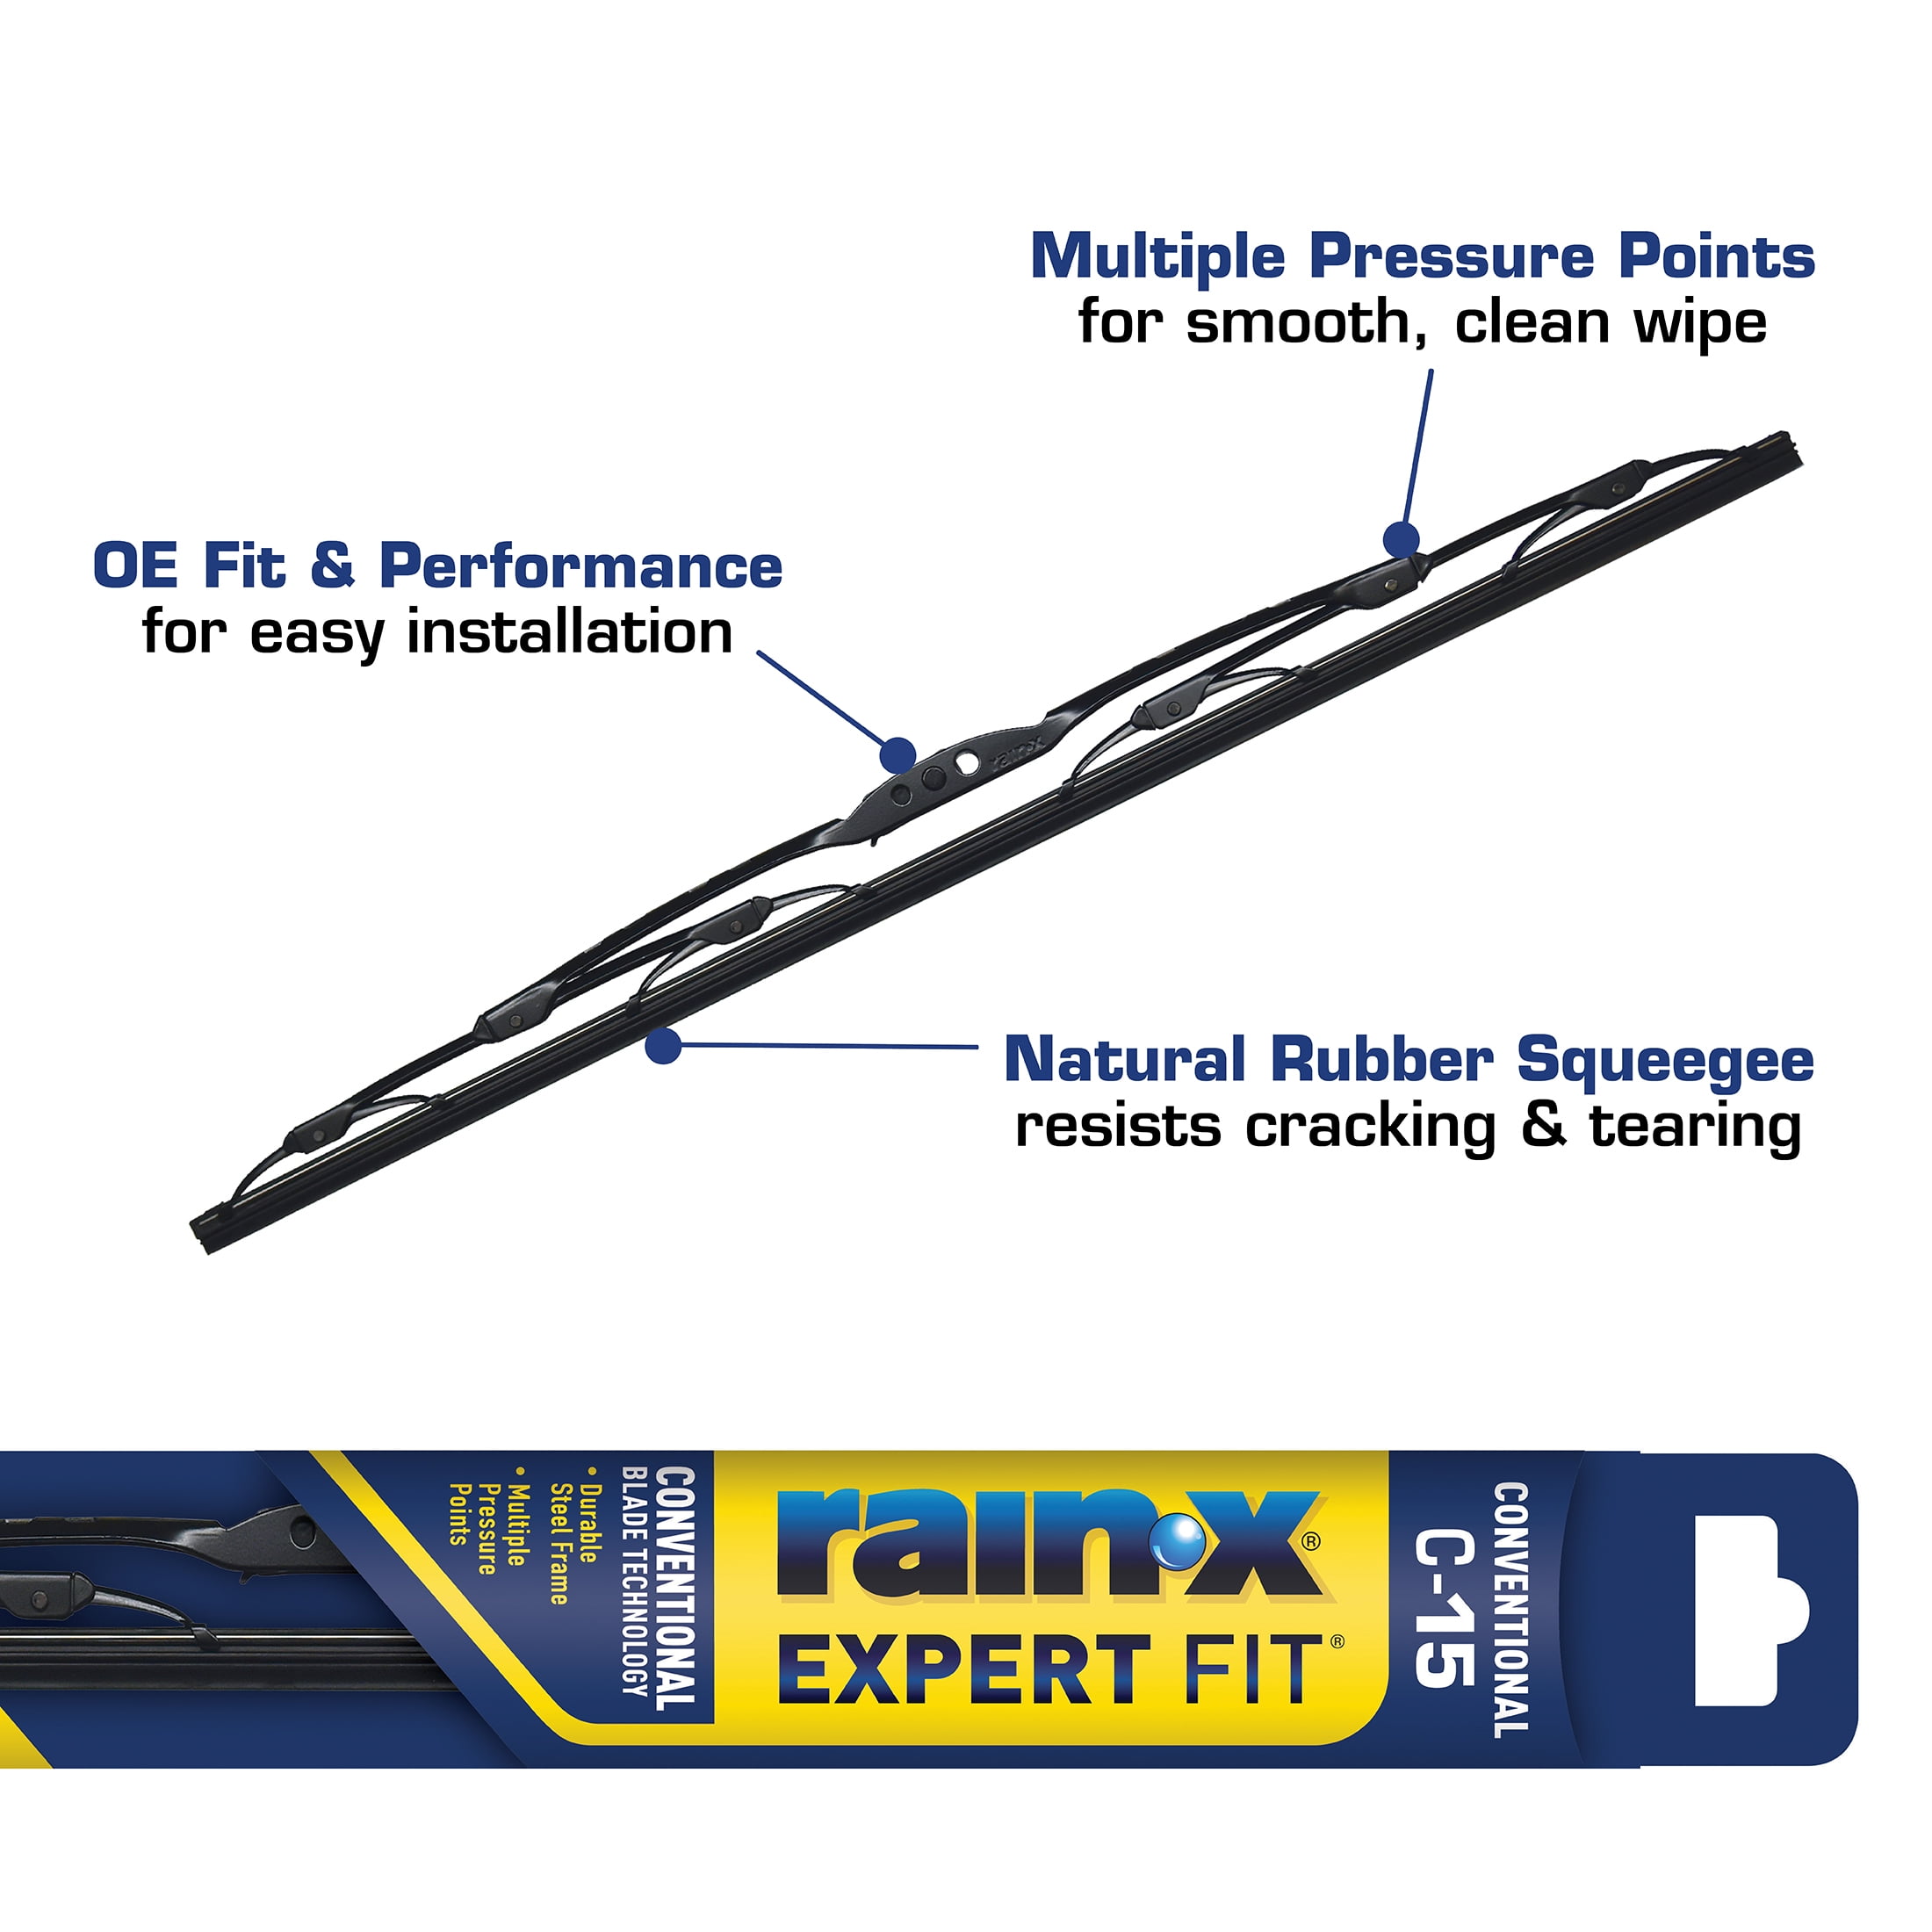 Rain-X Products: Find the Best Prices and Reviews